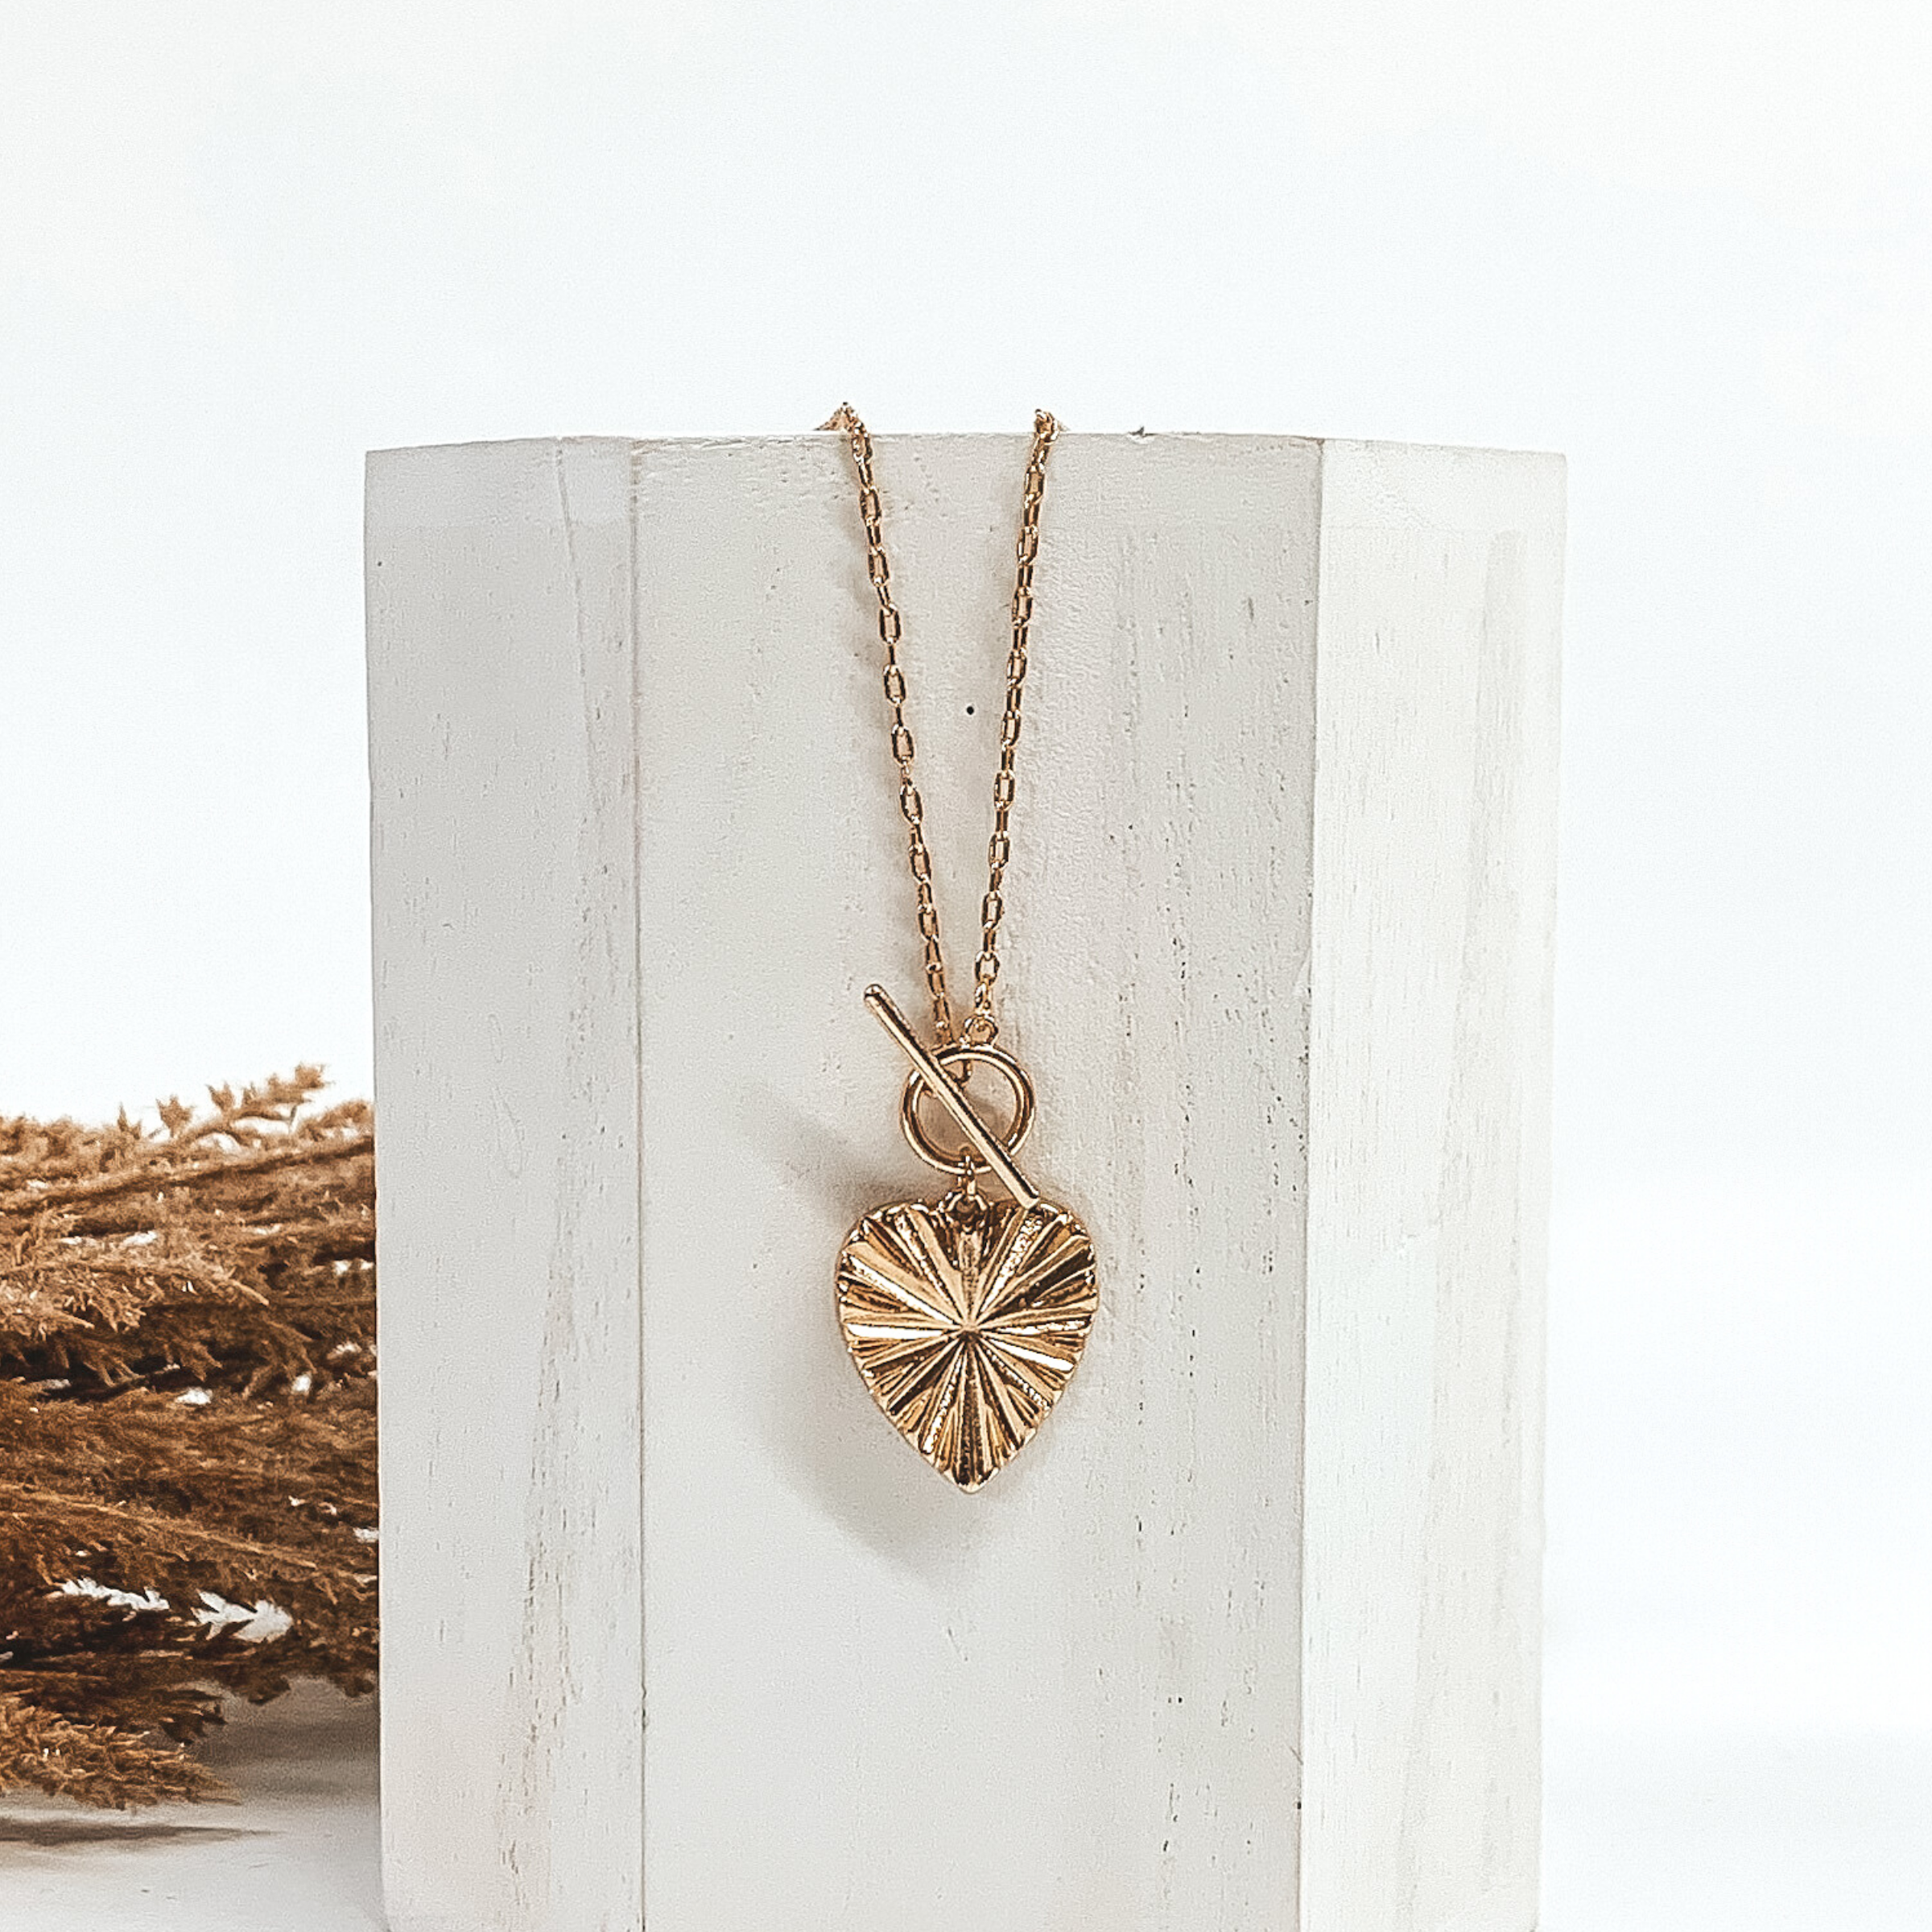 This is a gold necklace with a shell textured heart pendant and a front toggle clasp. This necklace is pictured laying on a white block and on a white background with tan floral on the left side of the block.